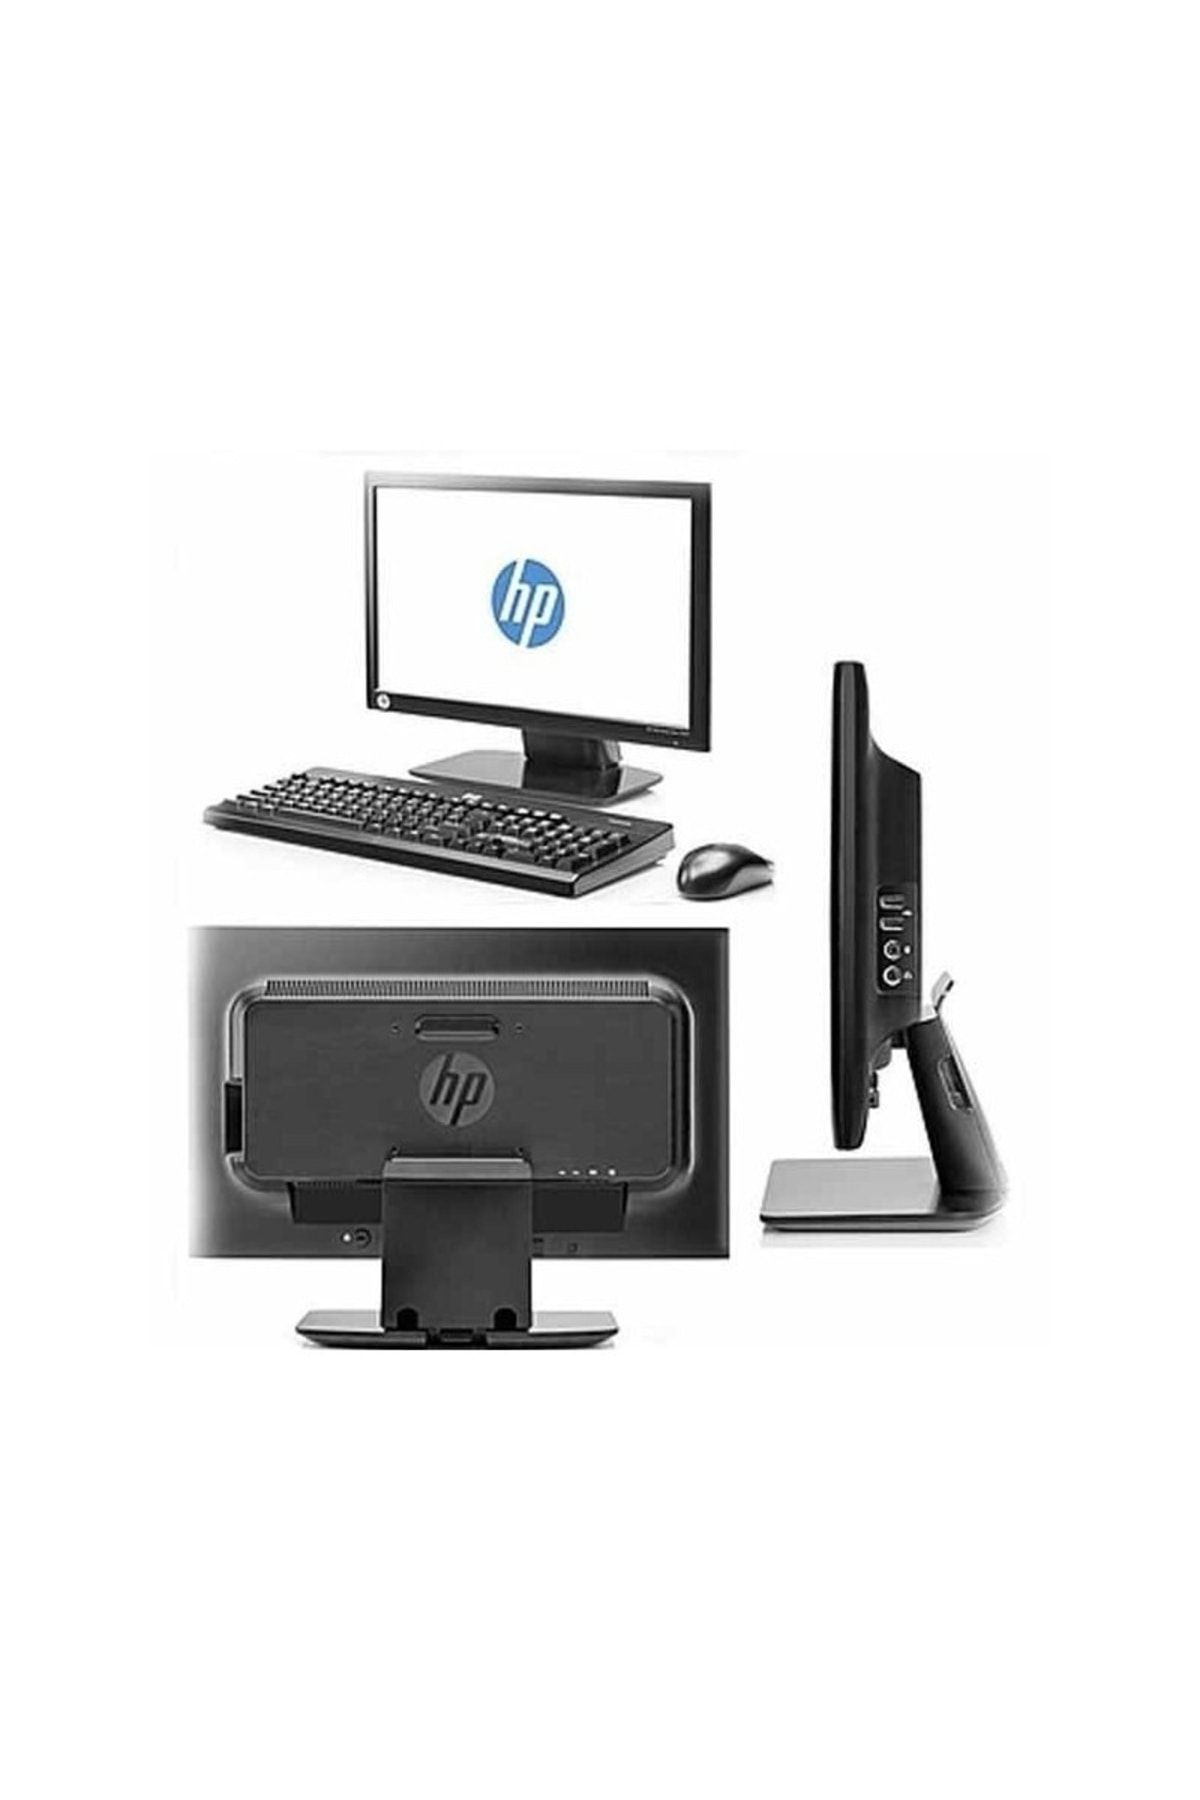 HP T410 All-in-one Smart Zero Client Monitor